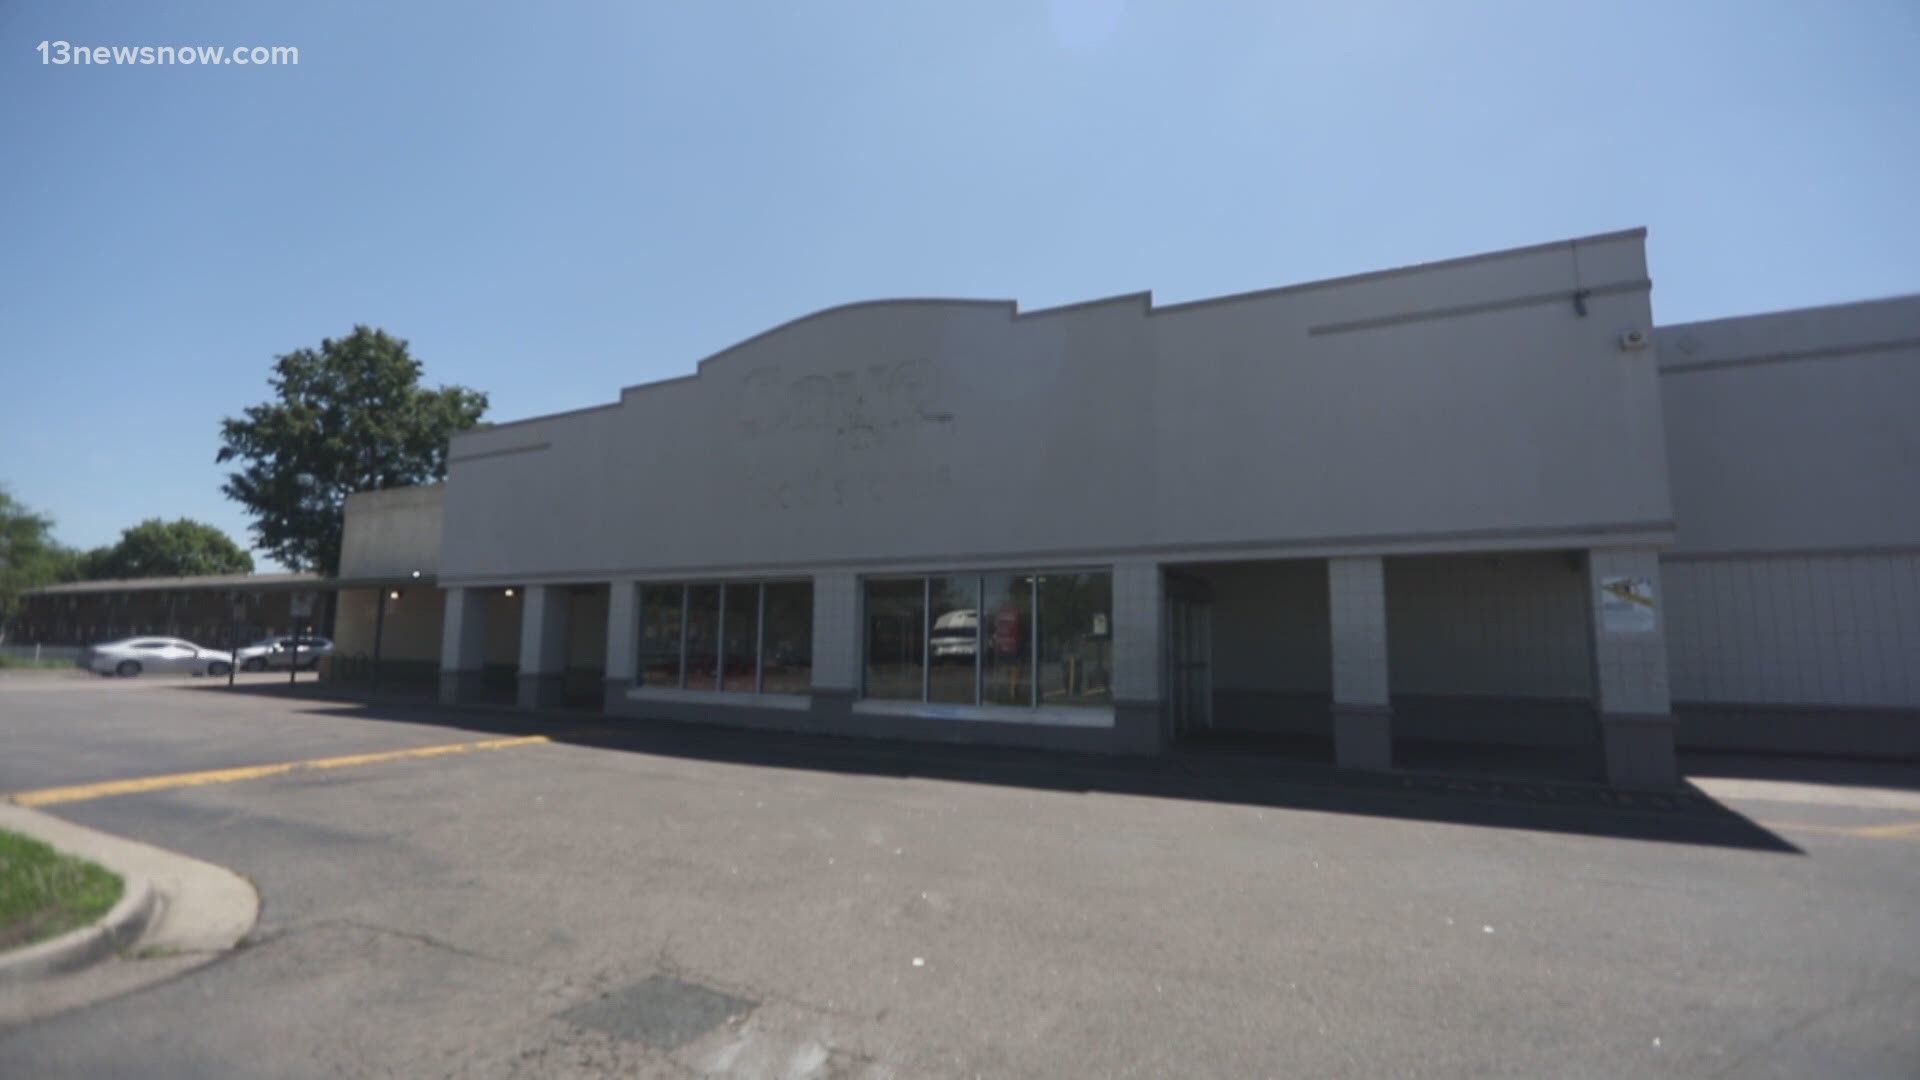 The community is working together to help folks in the St. Paul's neighborhood that just became a food desert after the Save A Lot grocery store just closed.